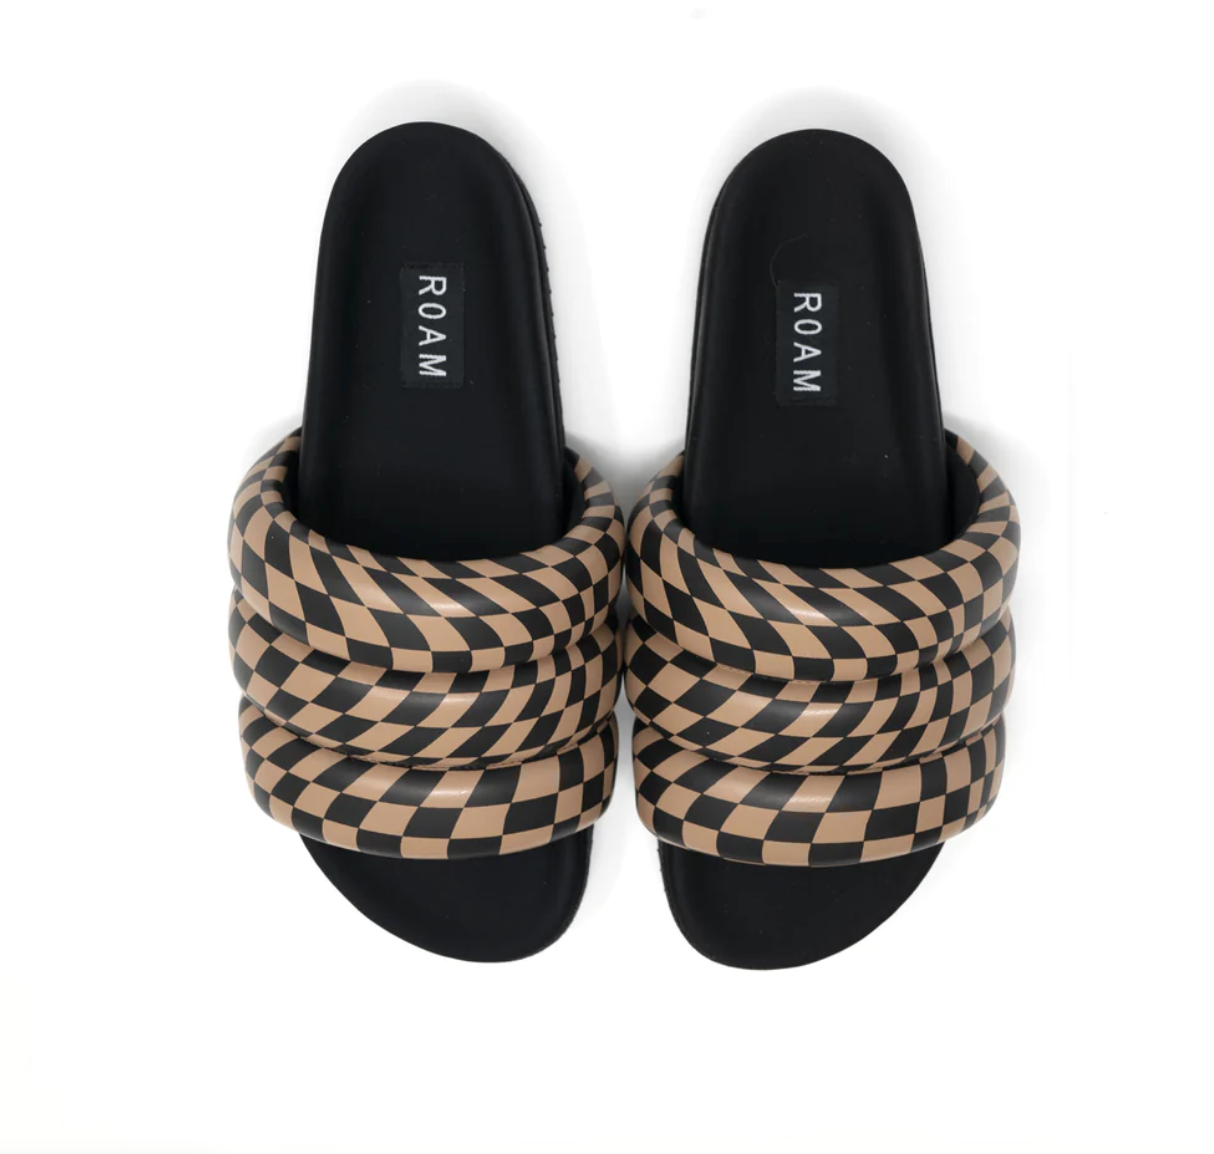 A pair of ROAM CHECKER WAVE PUFFY SLIDERS slide sandals with thick, padded straps featuring a black and tan checkerboard pattern, displayed against a white background. Brand name "Roam" visibly featured on the insoles, inspired by the laid-back bungalow style of Scottsdale, Arizona.